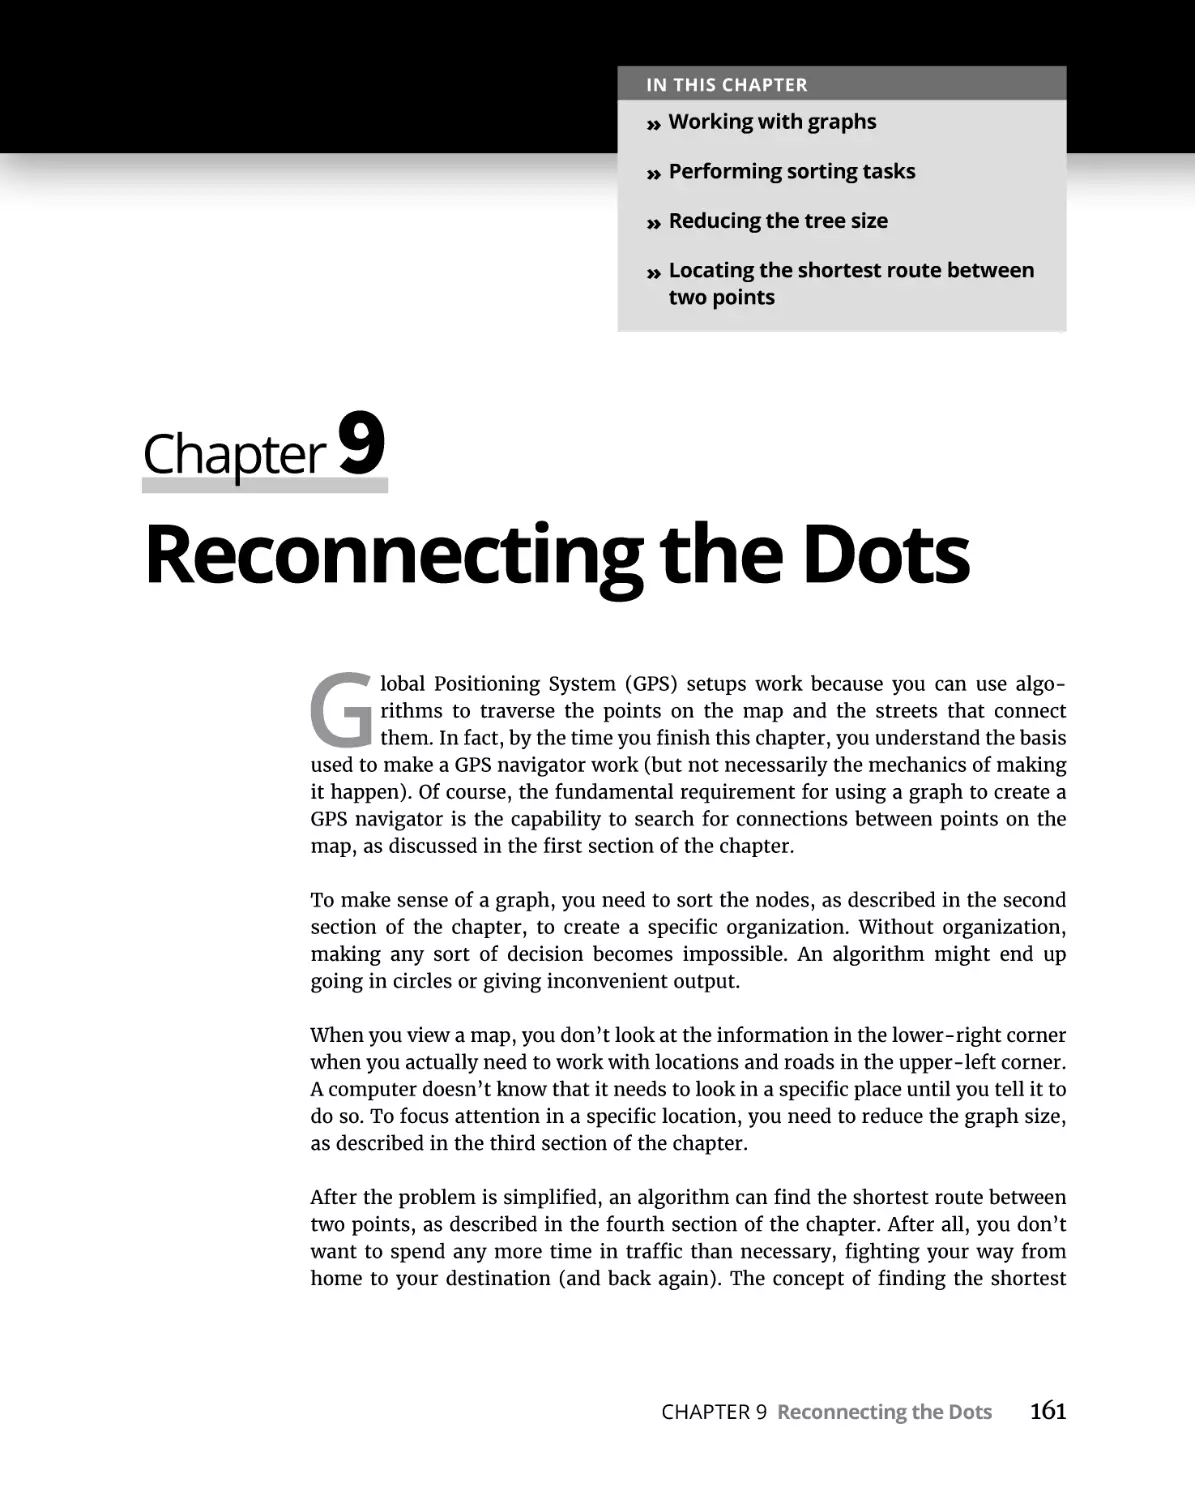 Chapter 9 Reconnecting the Dots